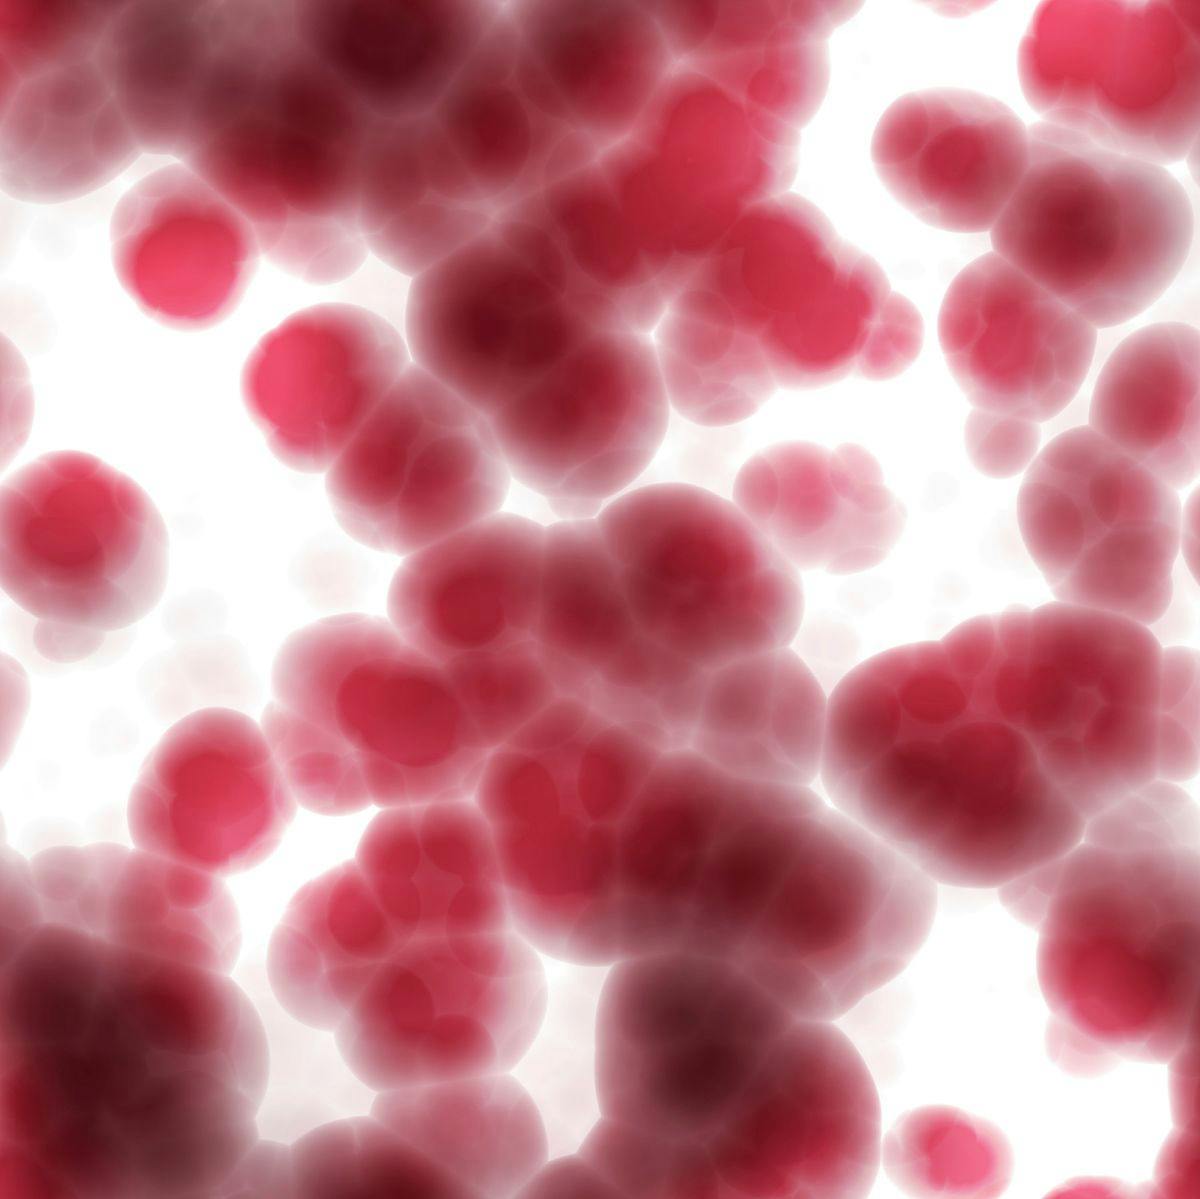 Picture of red cells